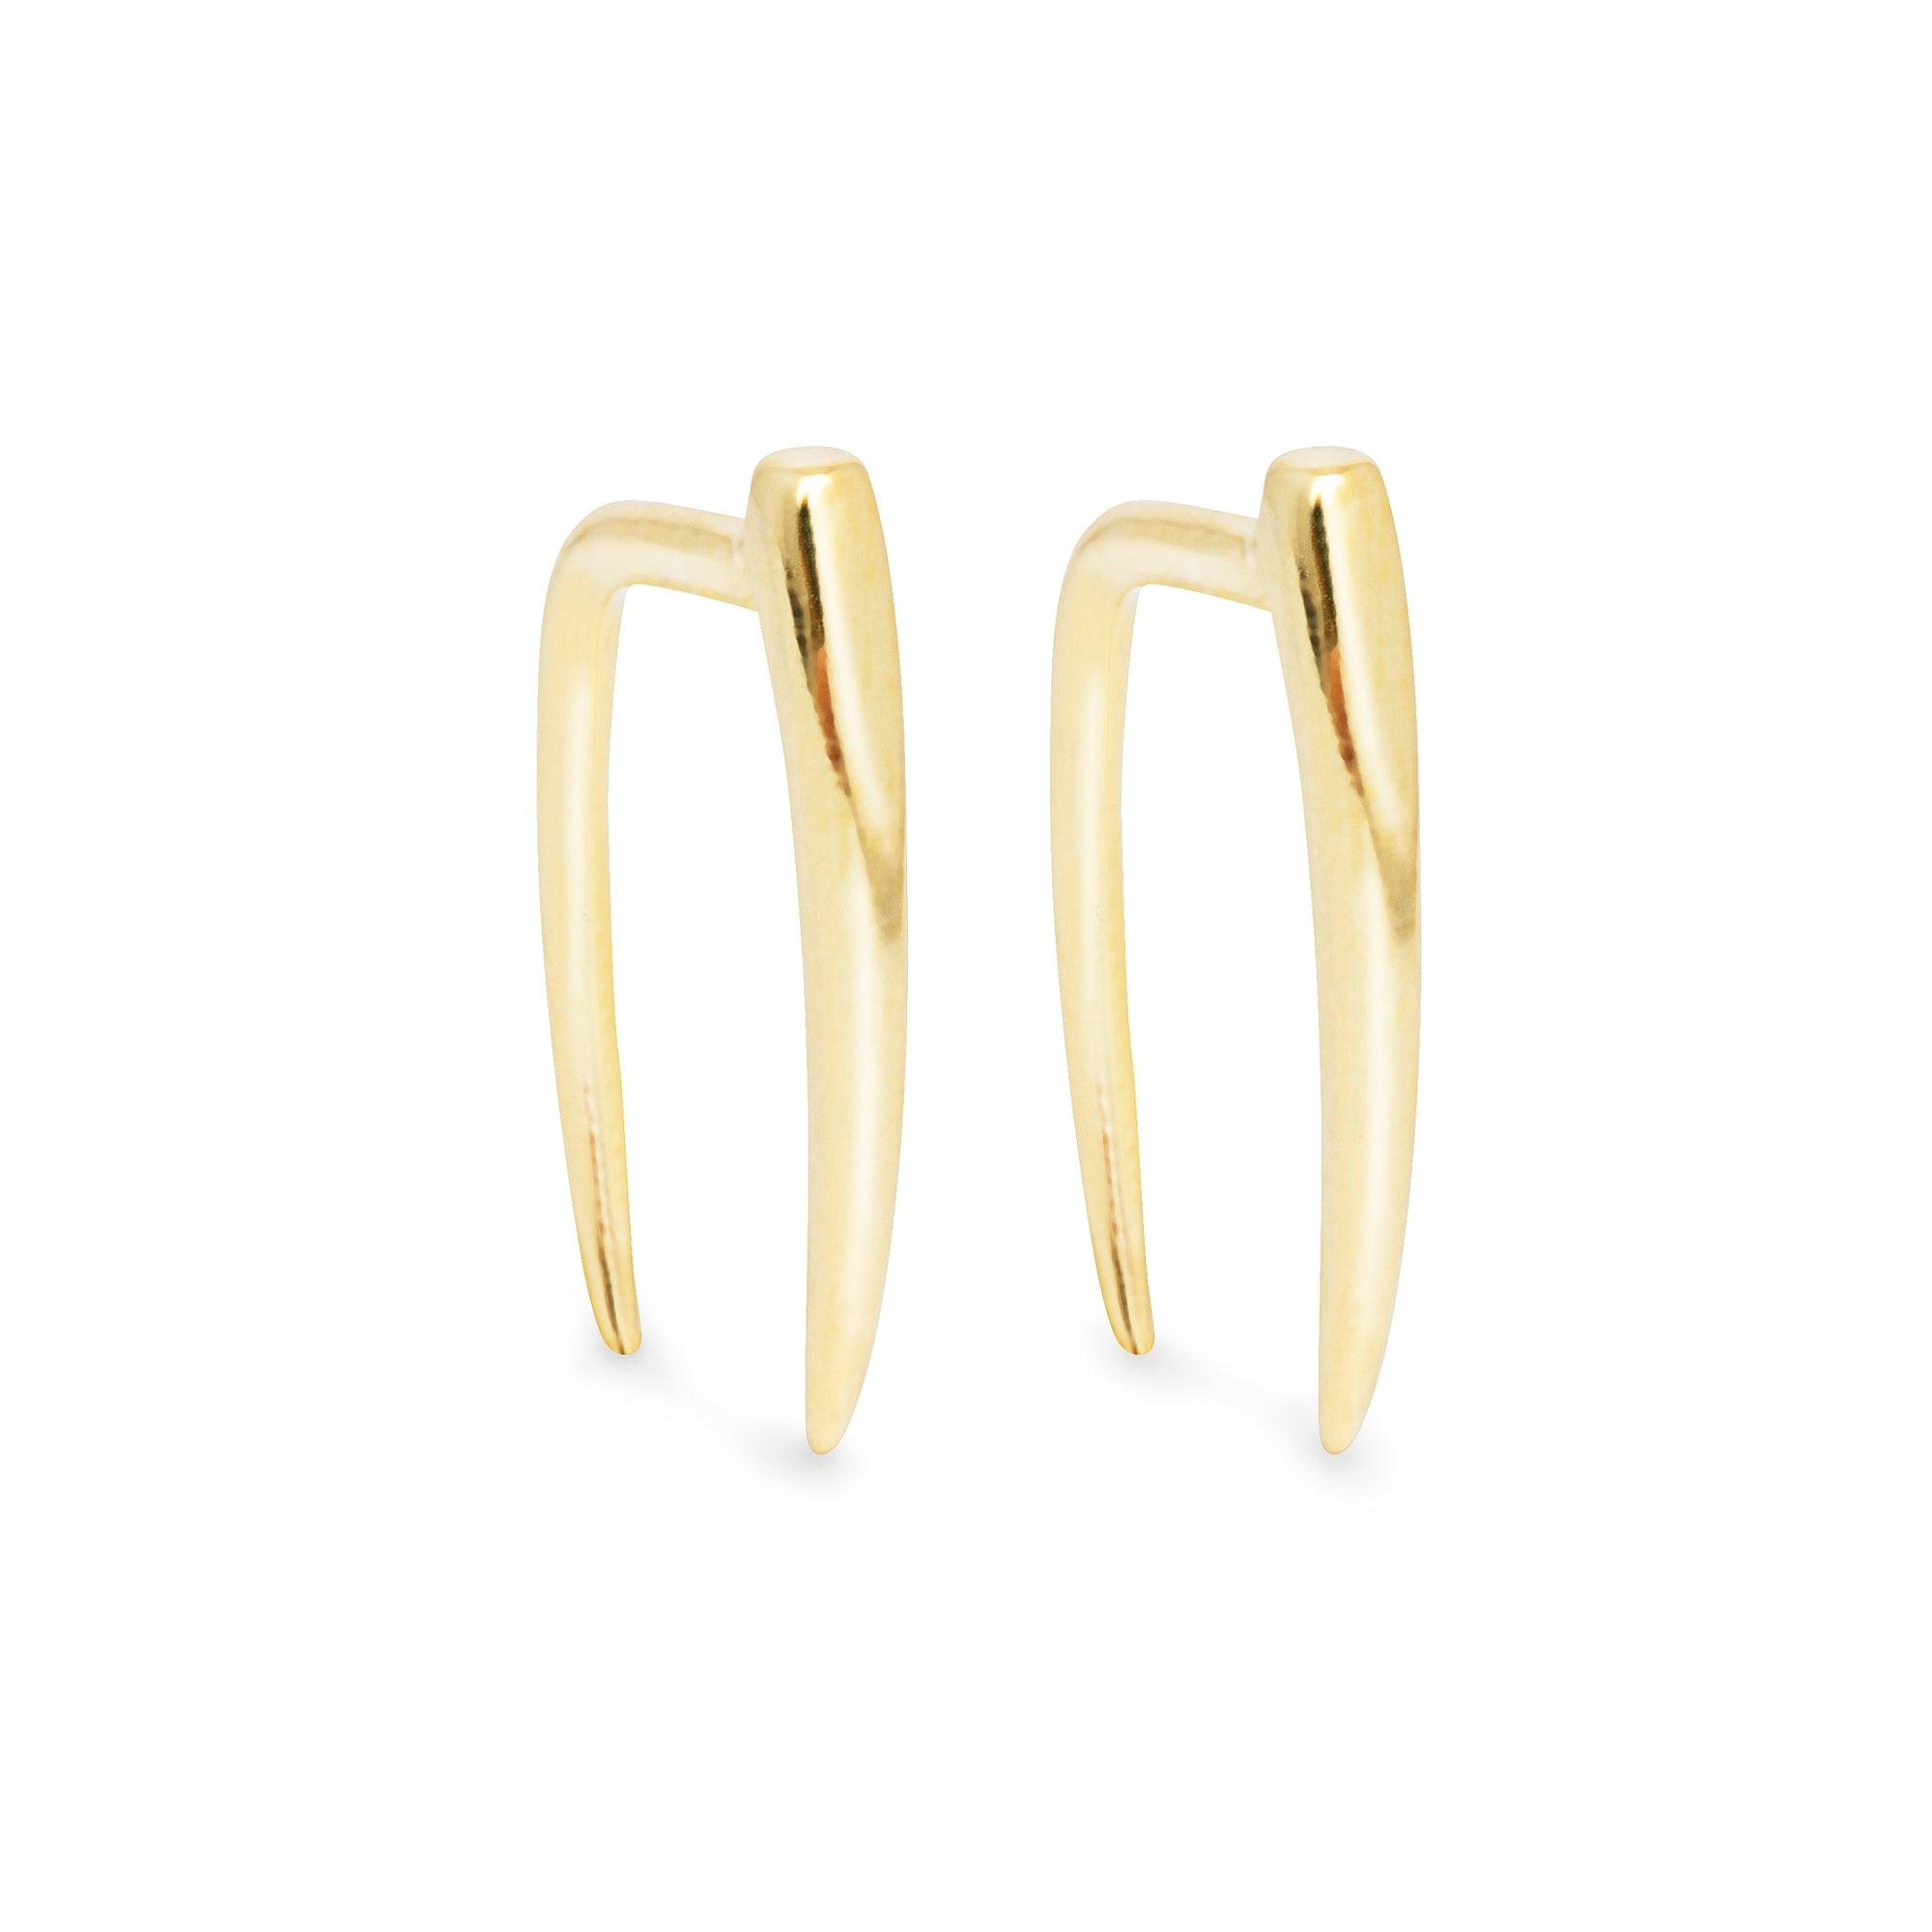 Zanna pair of gold earrings - Helix & Conch